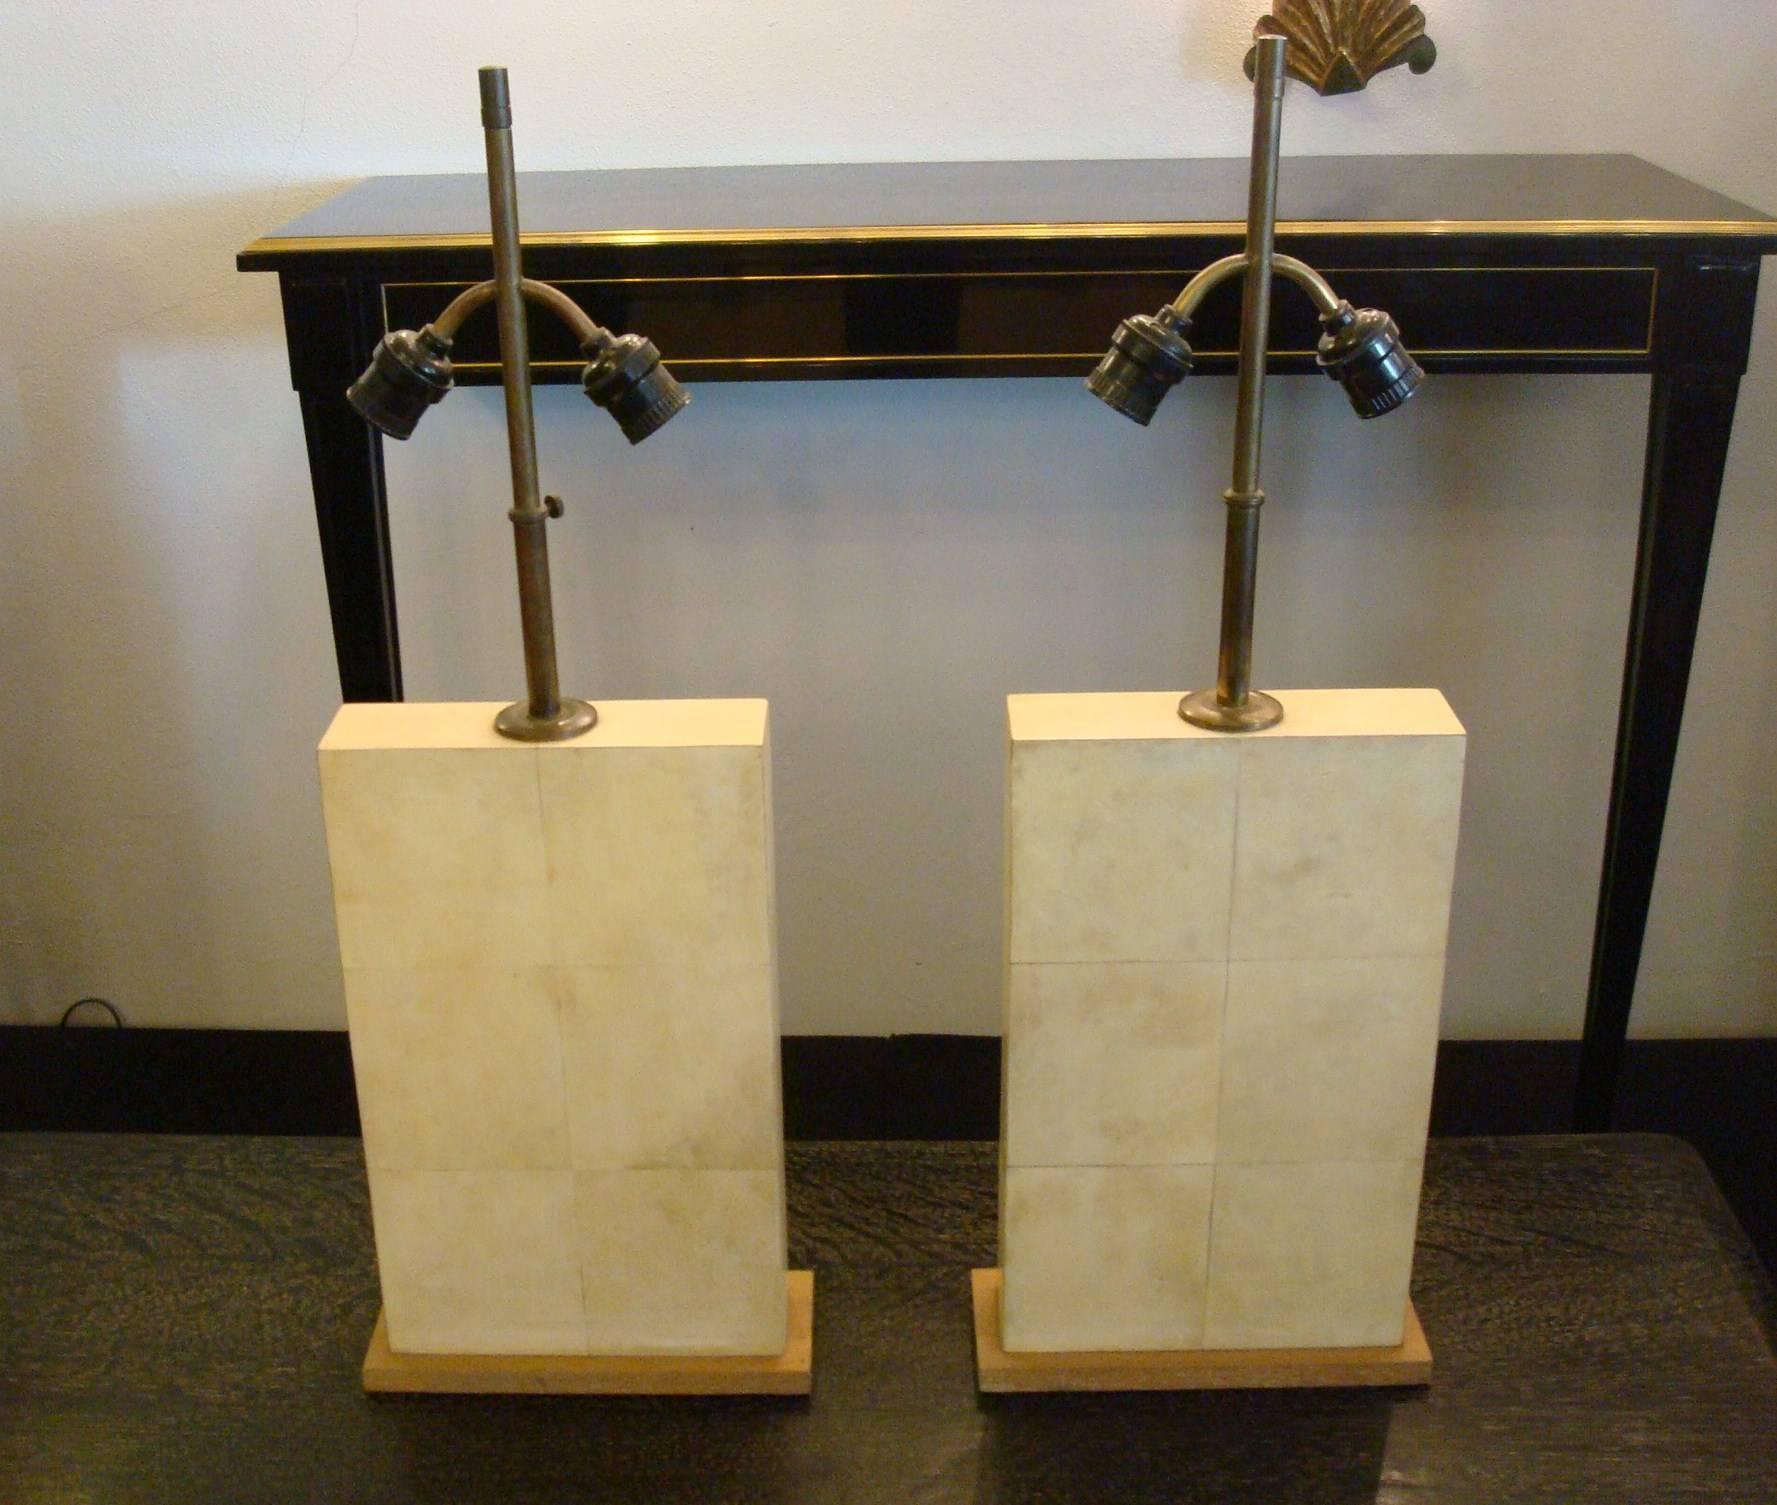 Lovely pair of parchment leather and oak table lamps. Jacques Adnet. Made in France, circa 1930. They have their original light fittings and cable, they can be replaced by new ones as request of the buyer. The overall height including the bronze